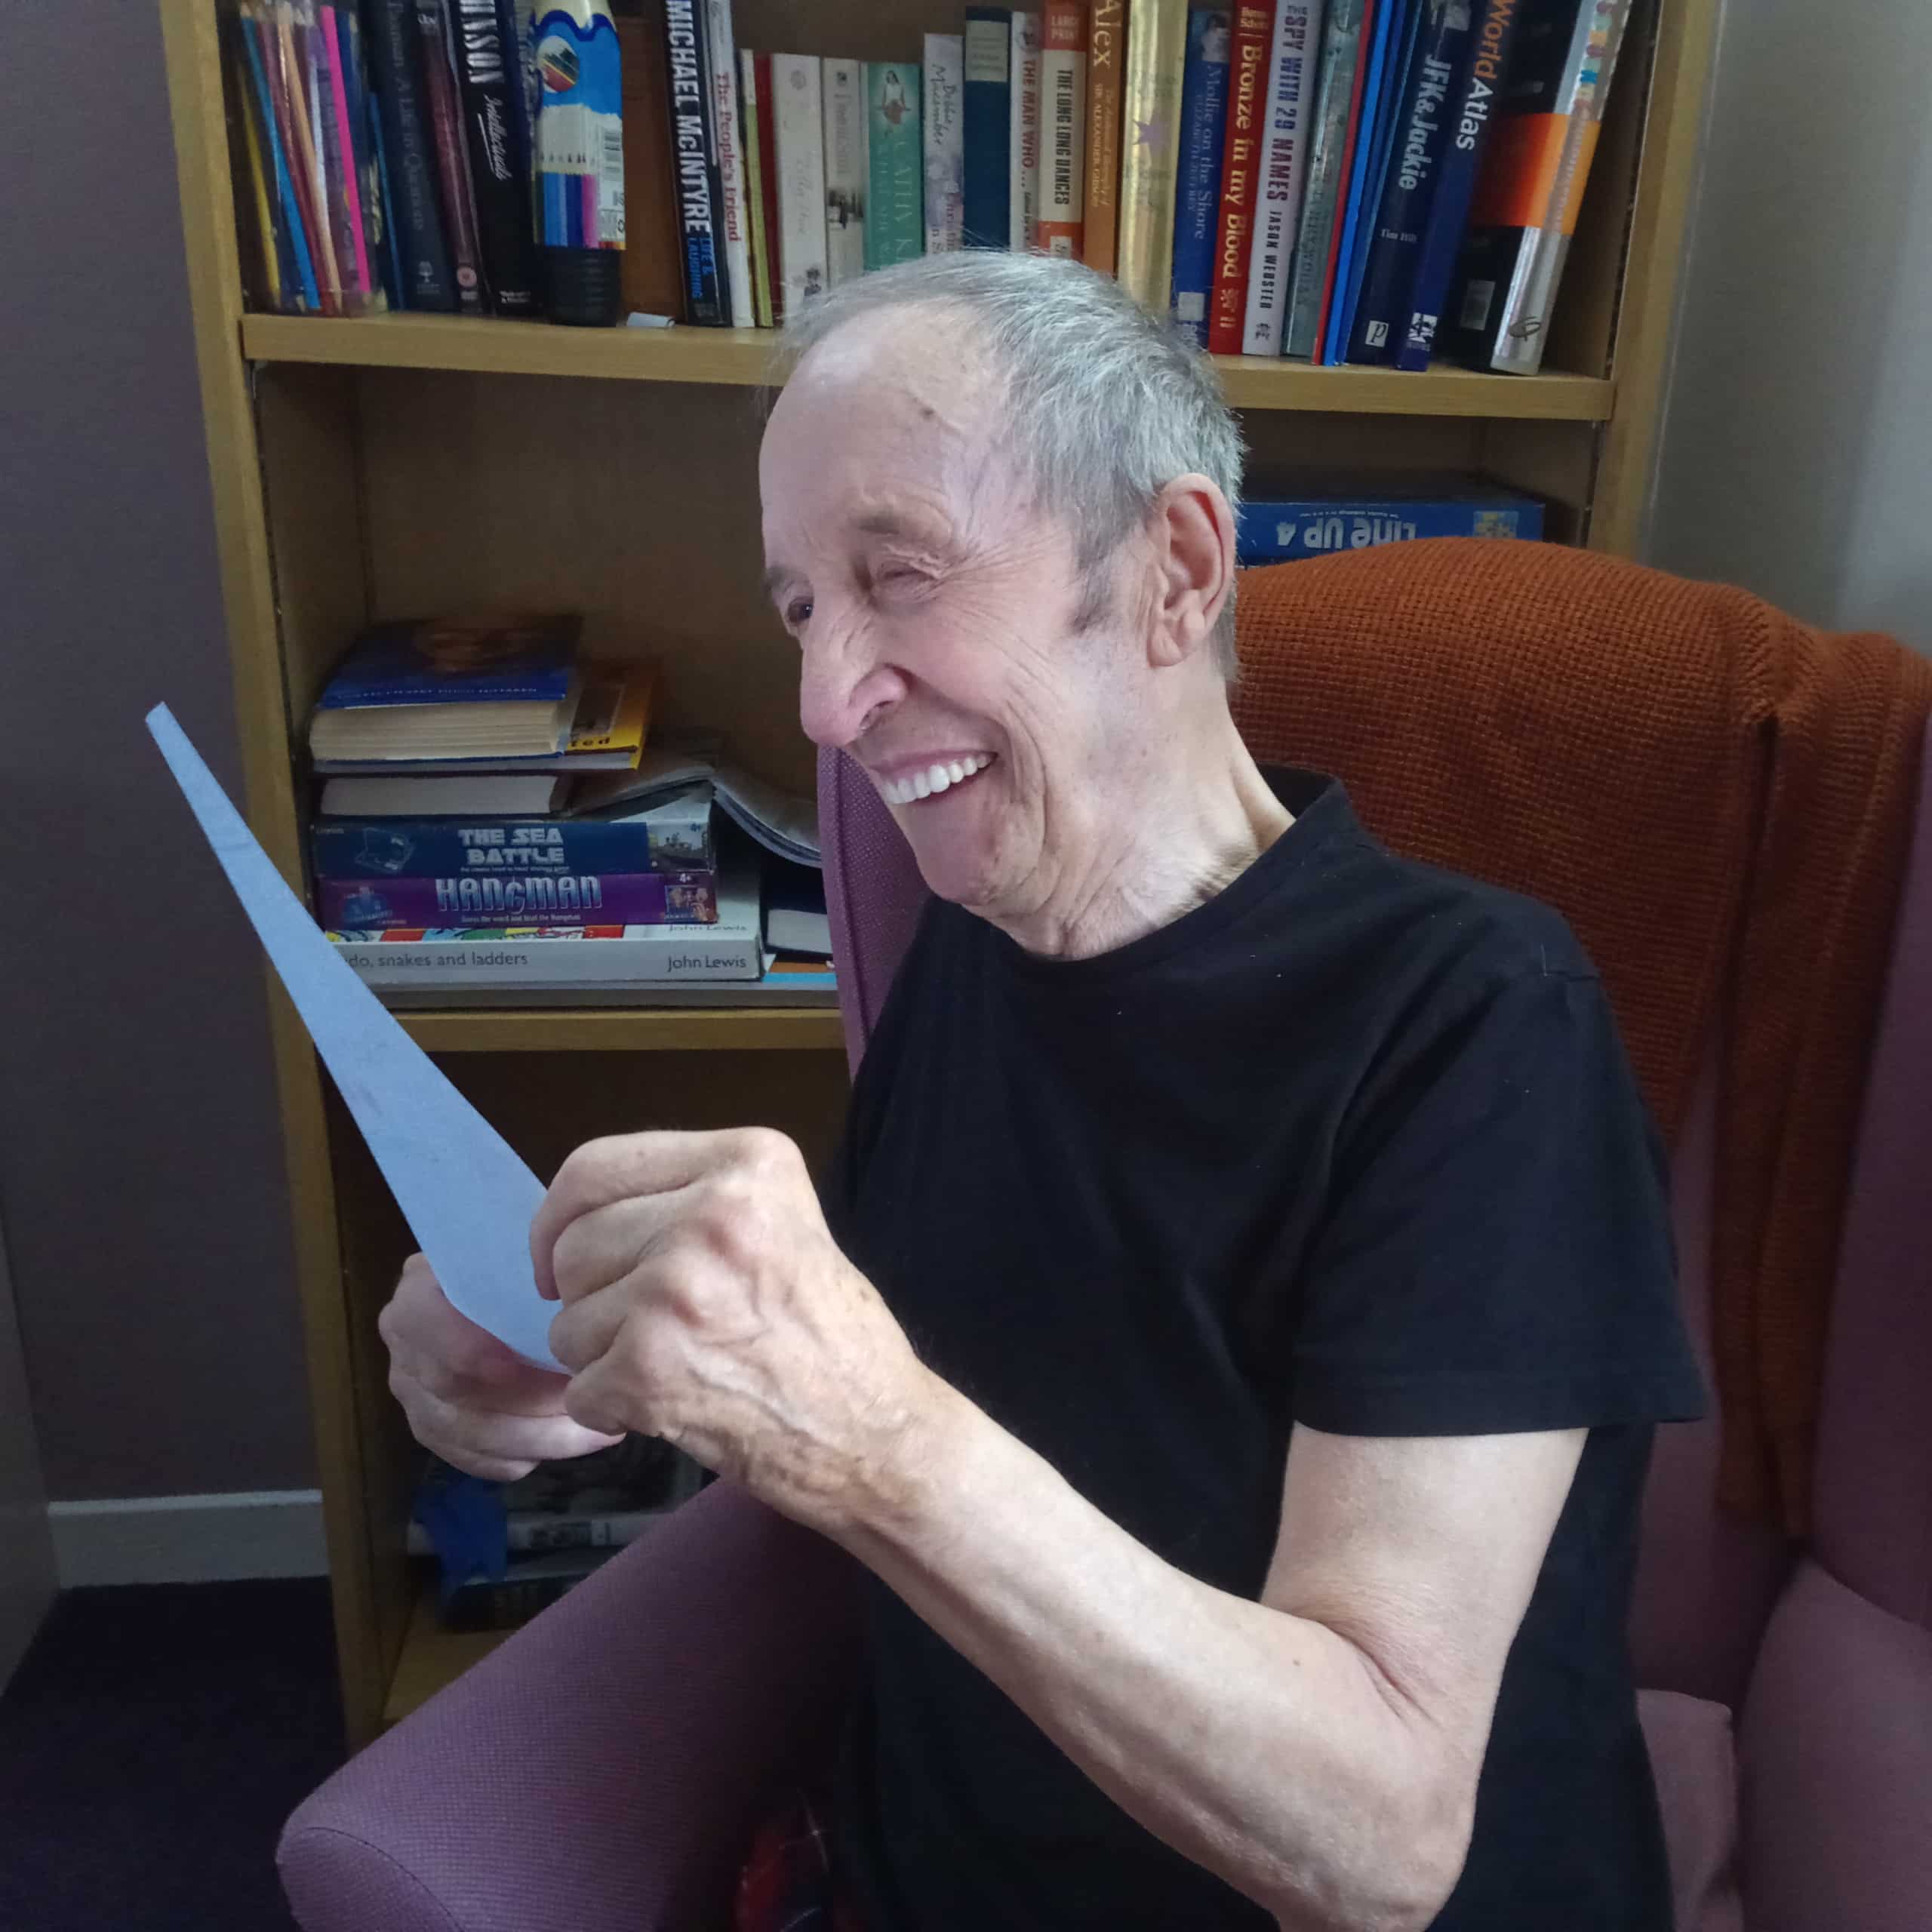 Stuart, a resident of Kingsgate Care Home in East Kilbride, smiling as he reads a Happygram from his wife.